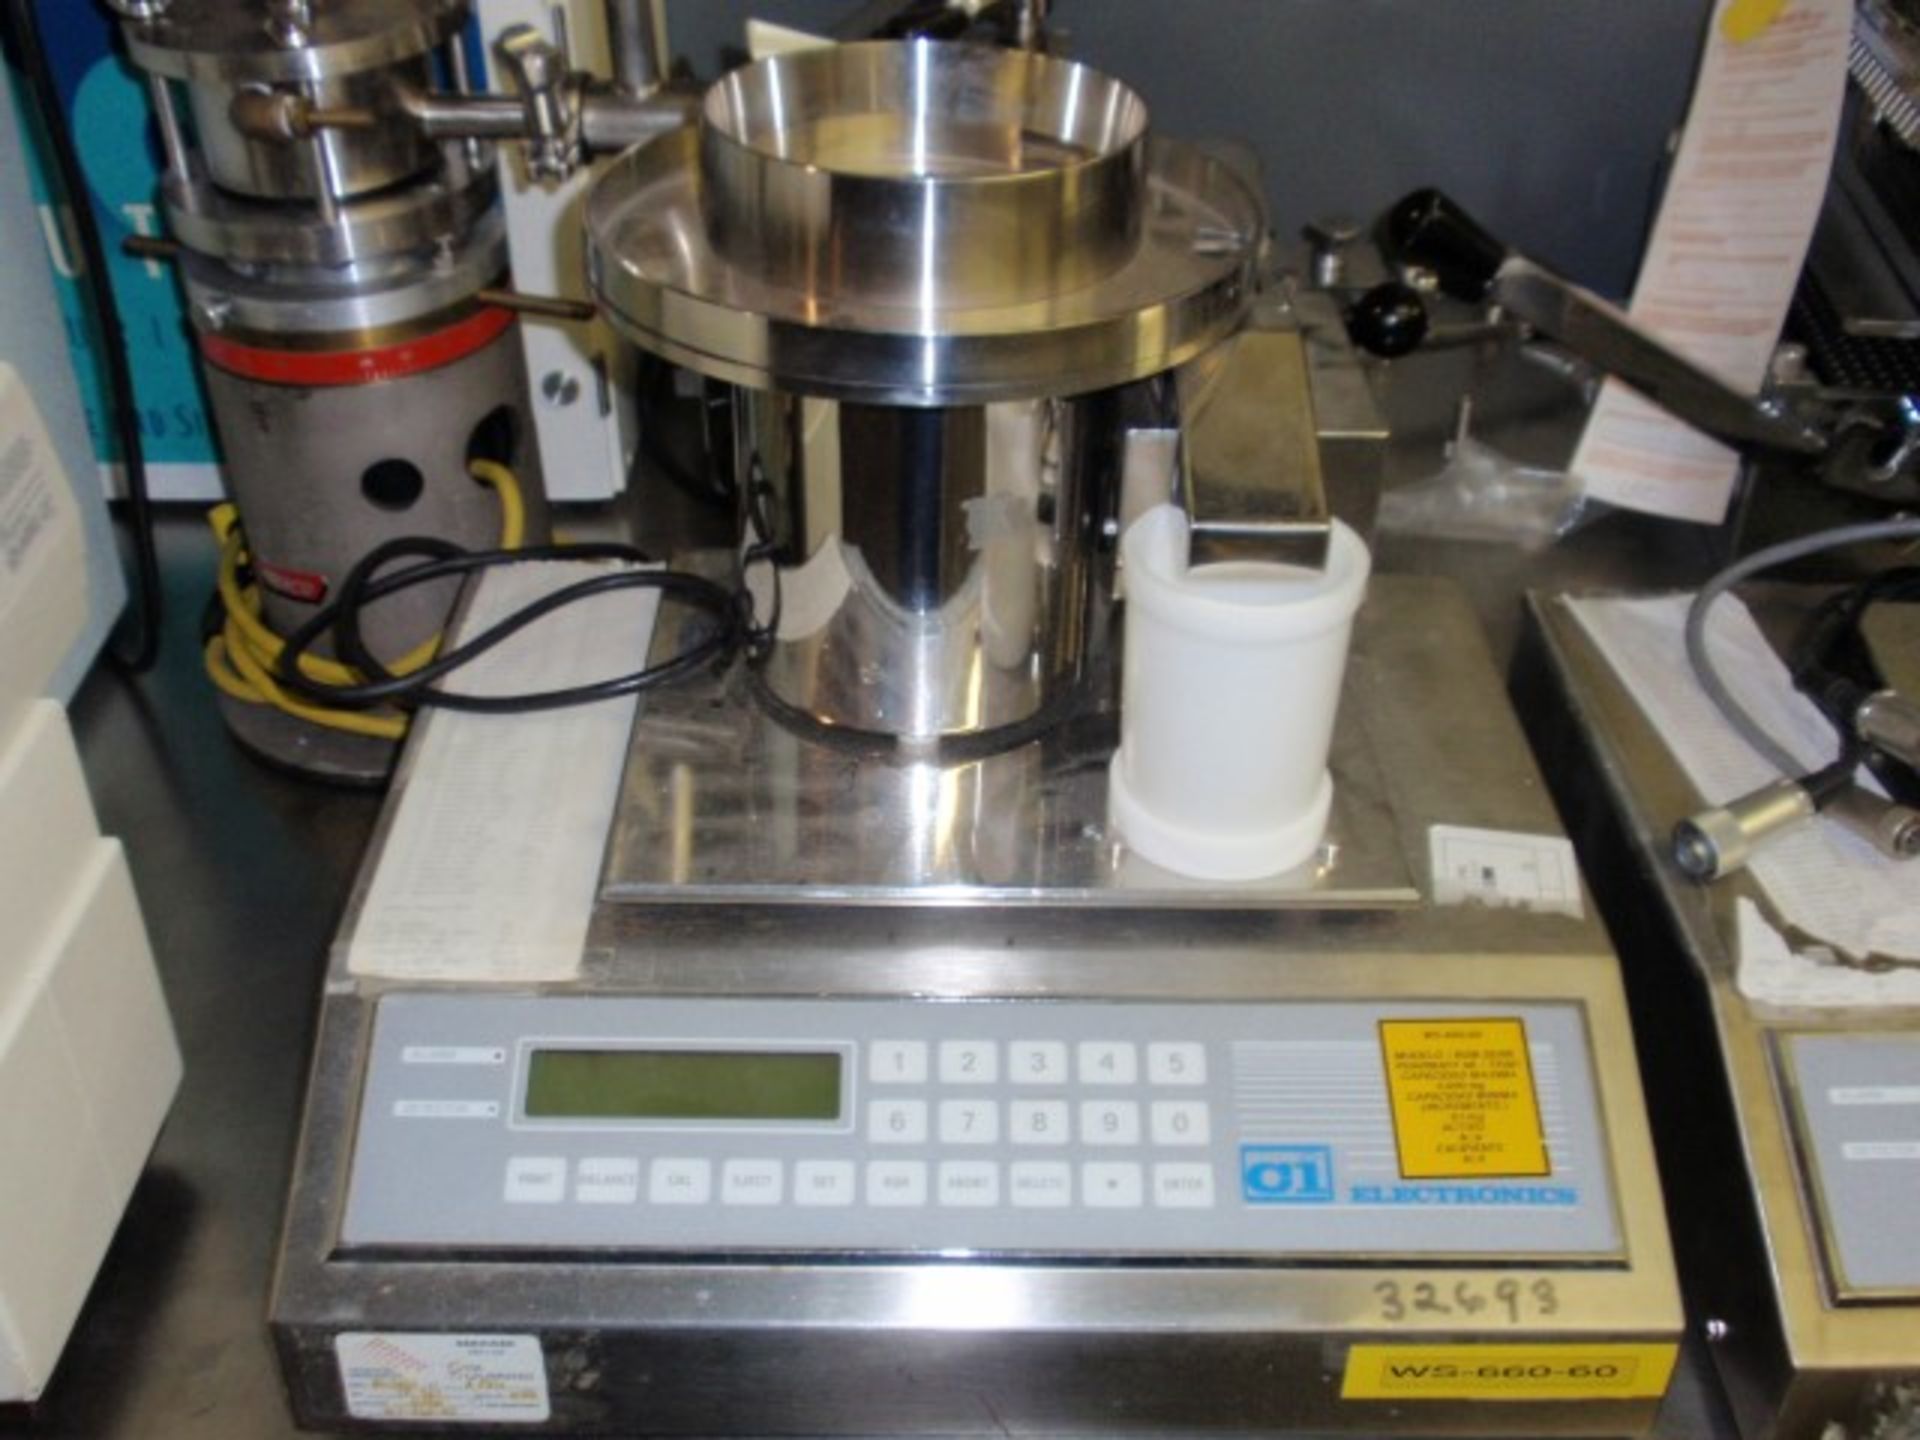 CI Electronics tablet/capsule checkweigher, 115 volt, serial# TP-317.